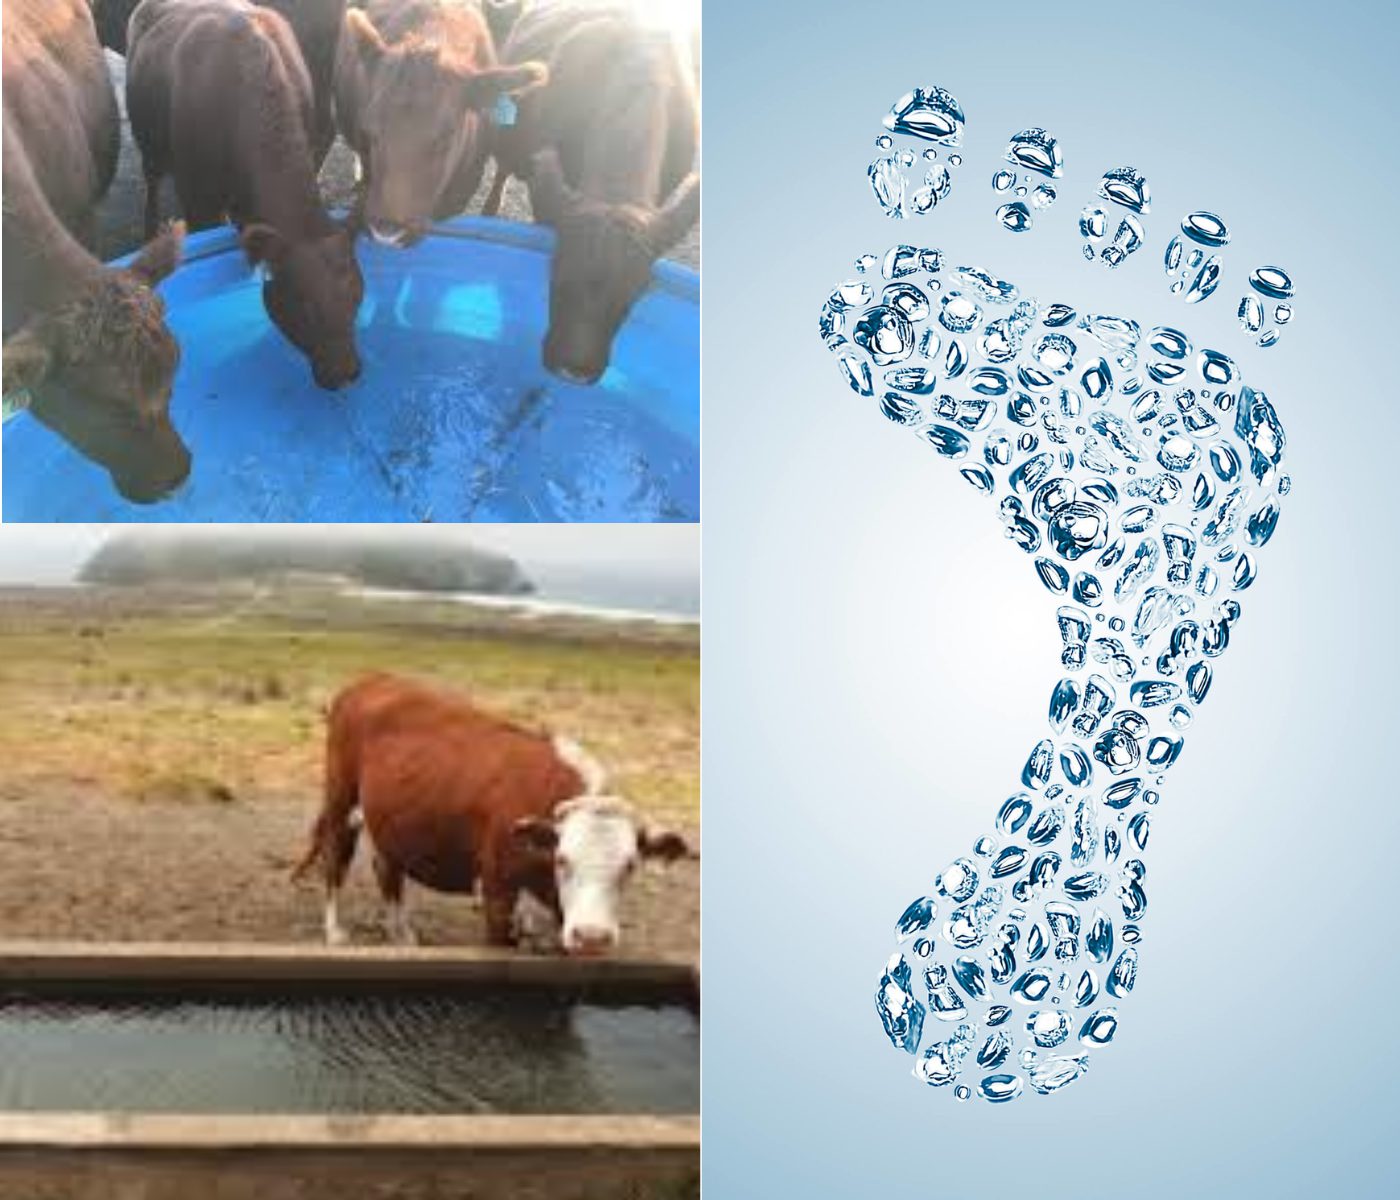 “The water footprint” within the cattle industry